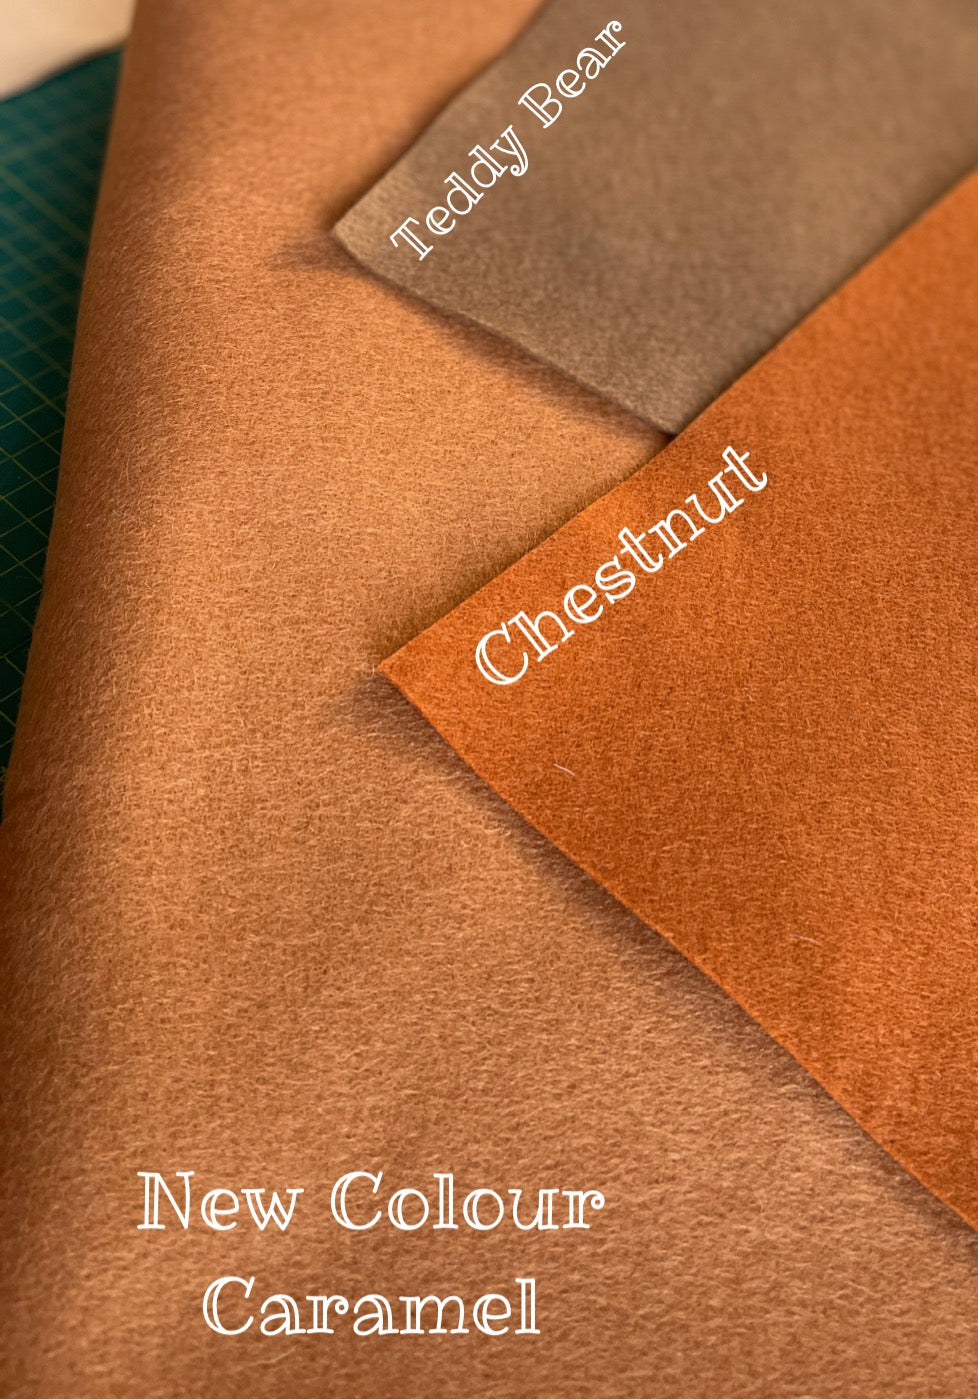 All the Naturals & Browns - 100% Wool Felt, 13 different shades